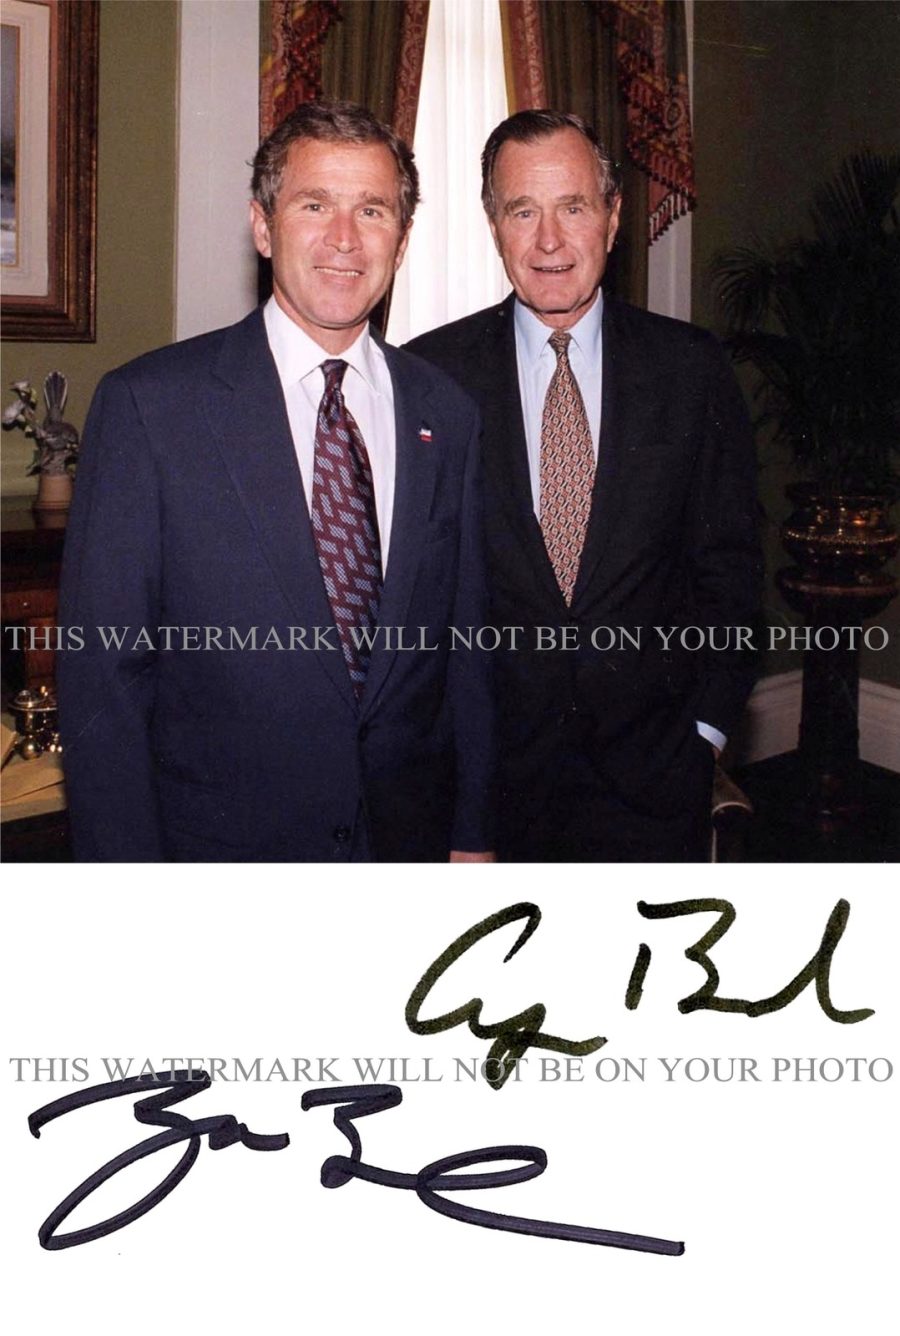 US PRESIDENTS GEORGE H. W. BUSH AND GEORGE W. BUSH SIGNED AUTOGRAPH 6x9 RP PHOTO